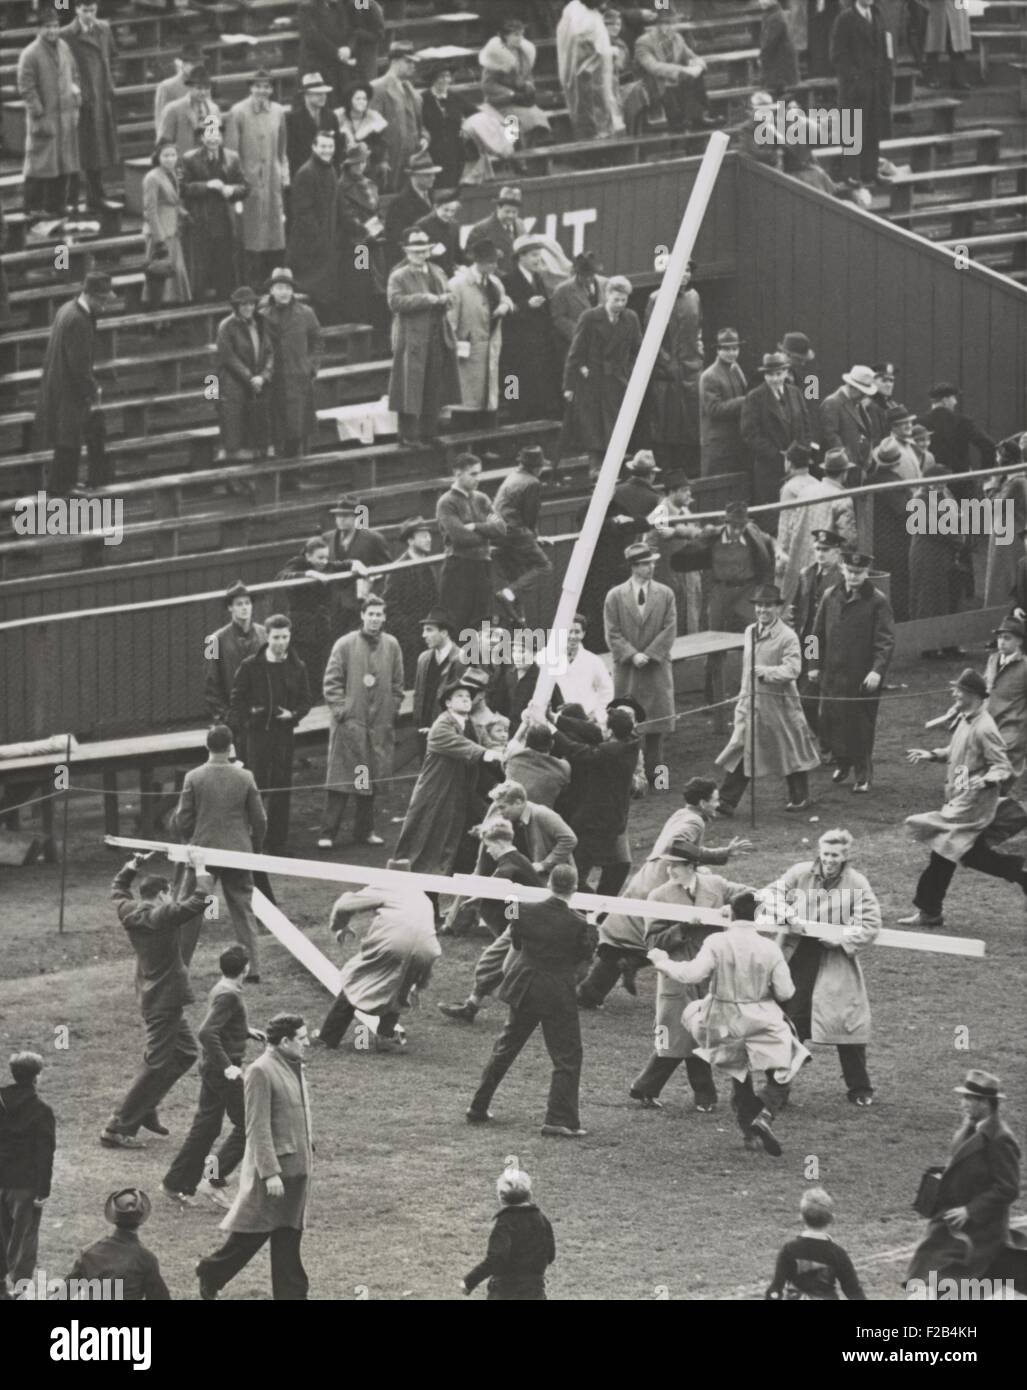 Brown University students tear down the goal posts in celebration of a 7-6 win over Columbia. Oct. 23, 1937. - (BSLOC 2015 1 217) Stock Photo